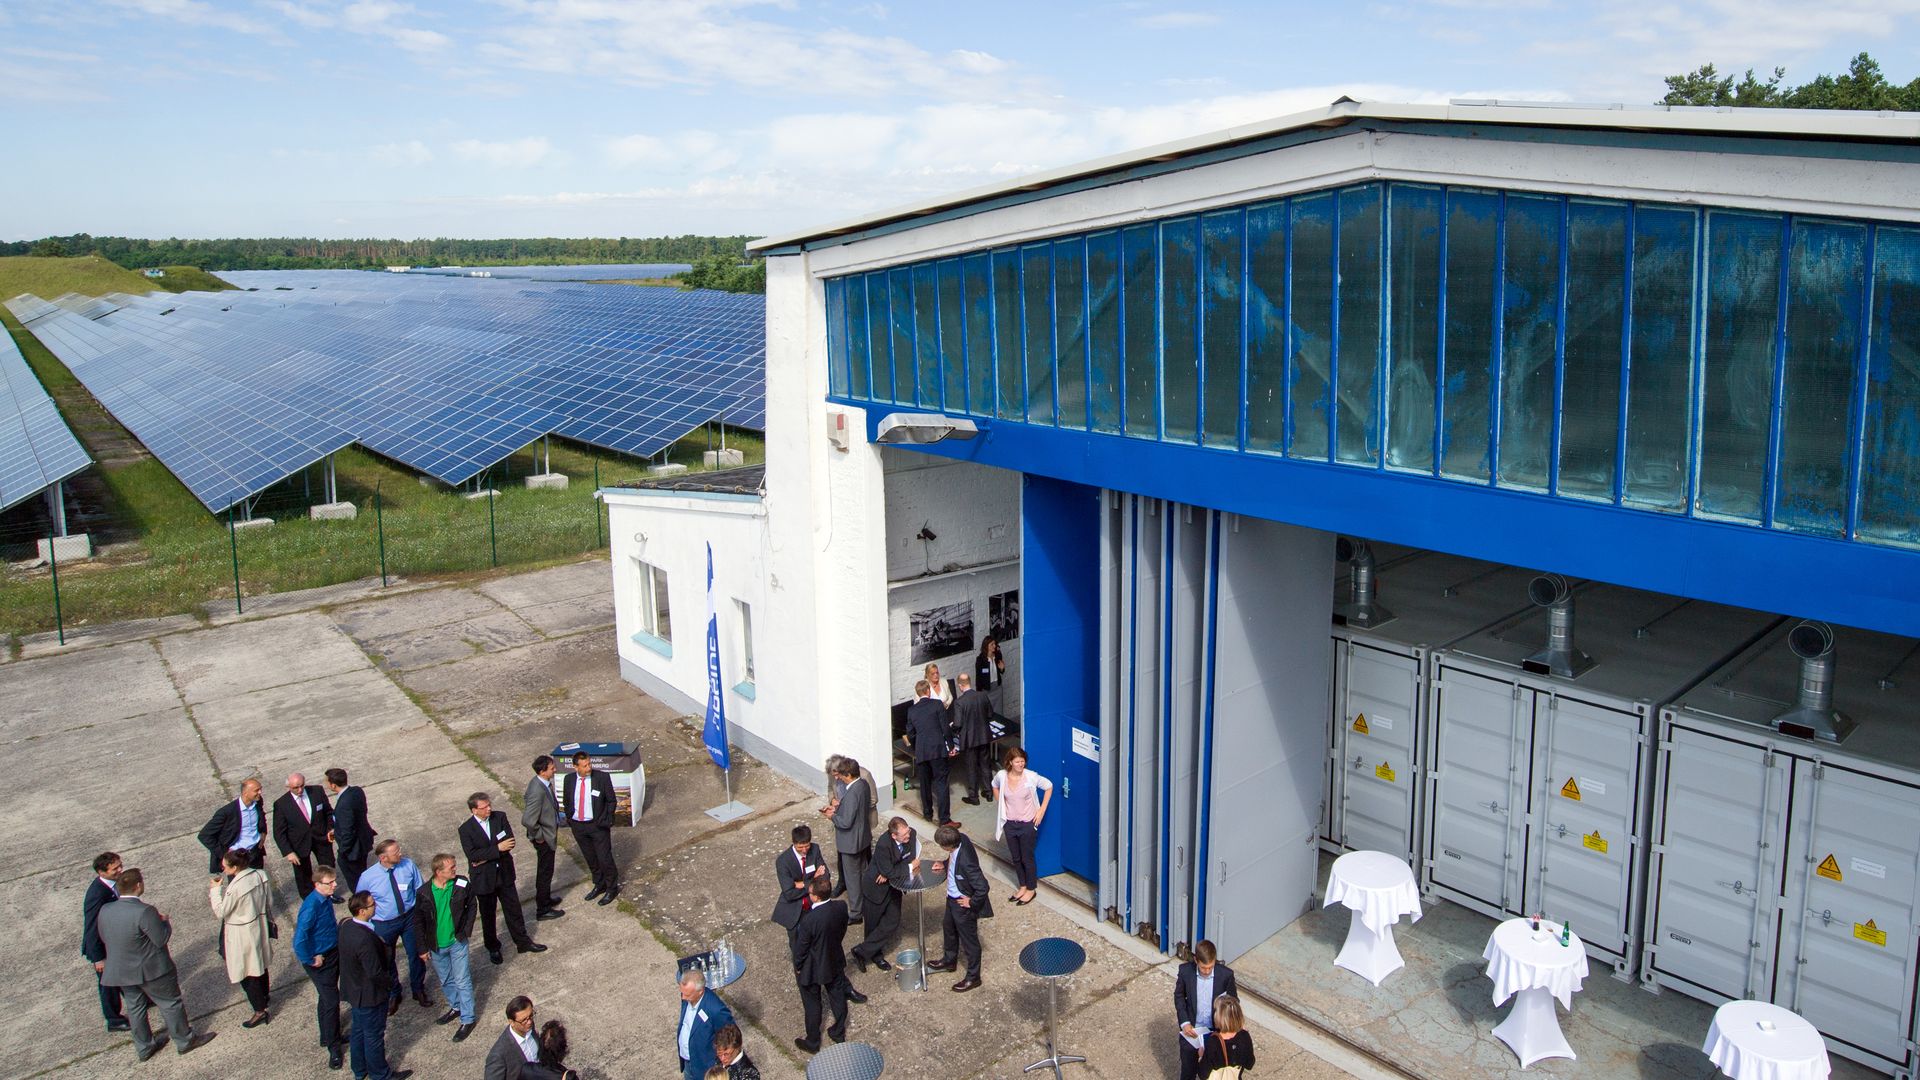 The new mass battery storage for electricity from a solar field is located in a former airplane hangar at the airfield in Neuhardenberg, Germany, 05 July 2016. 